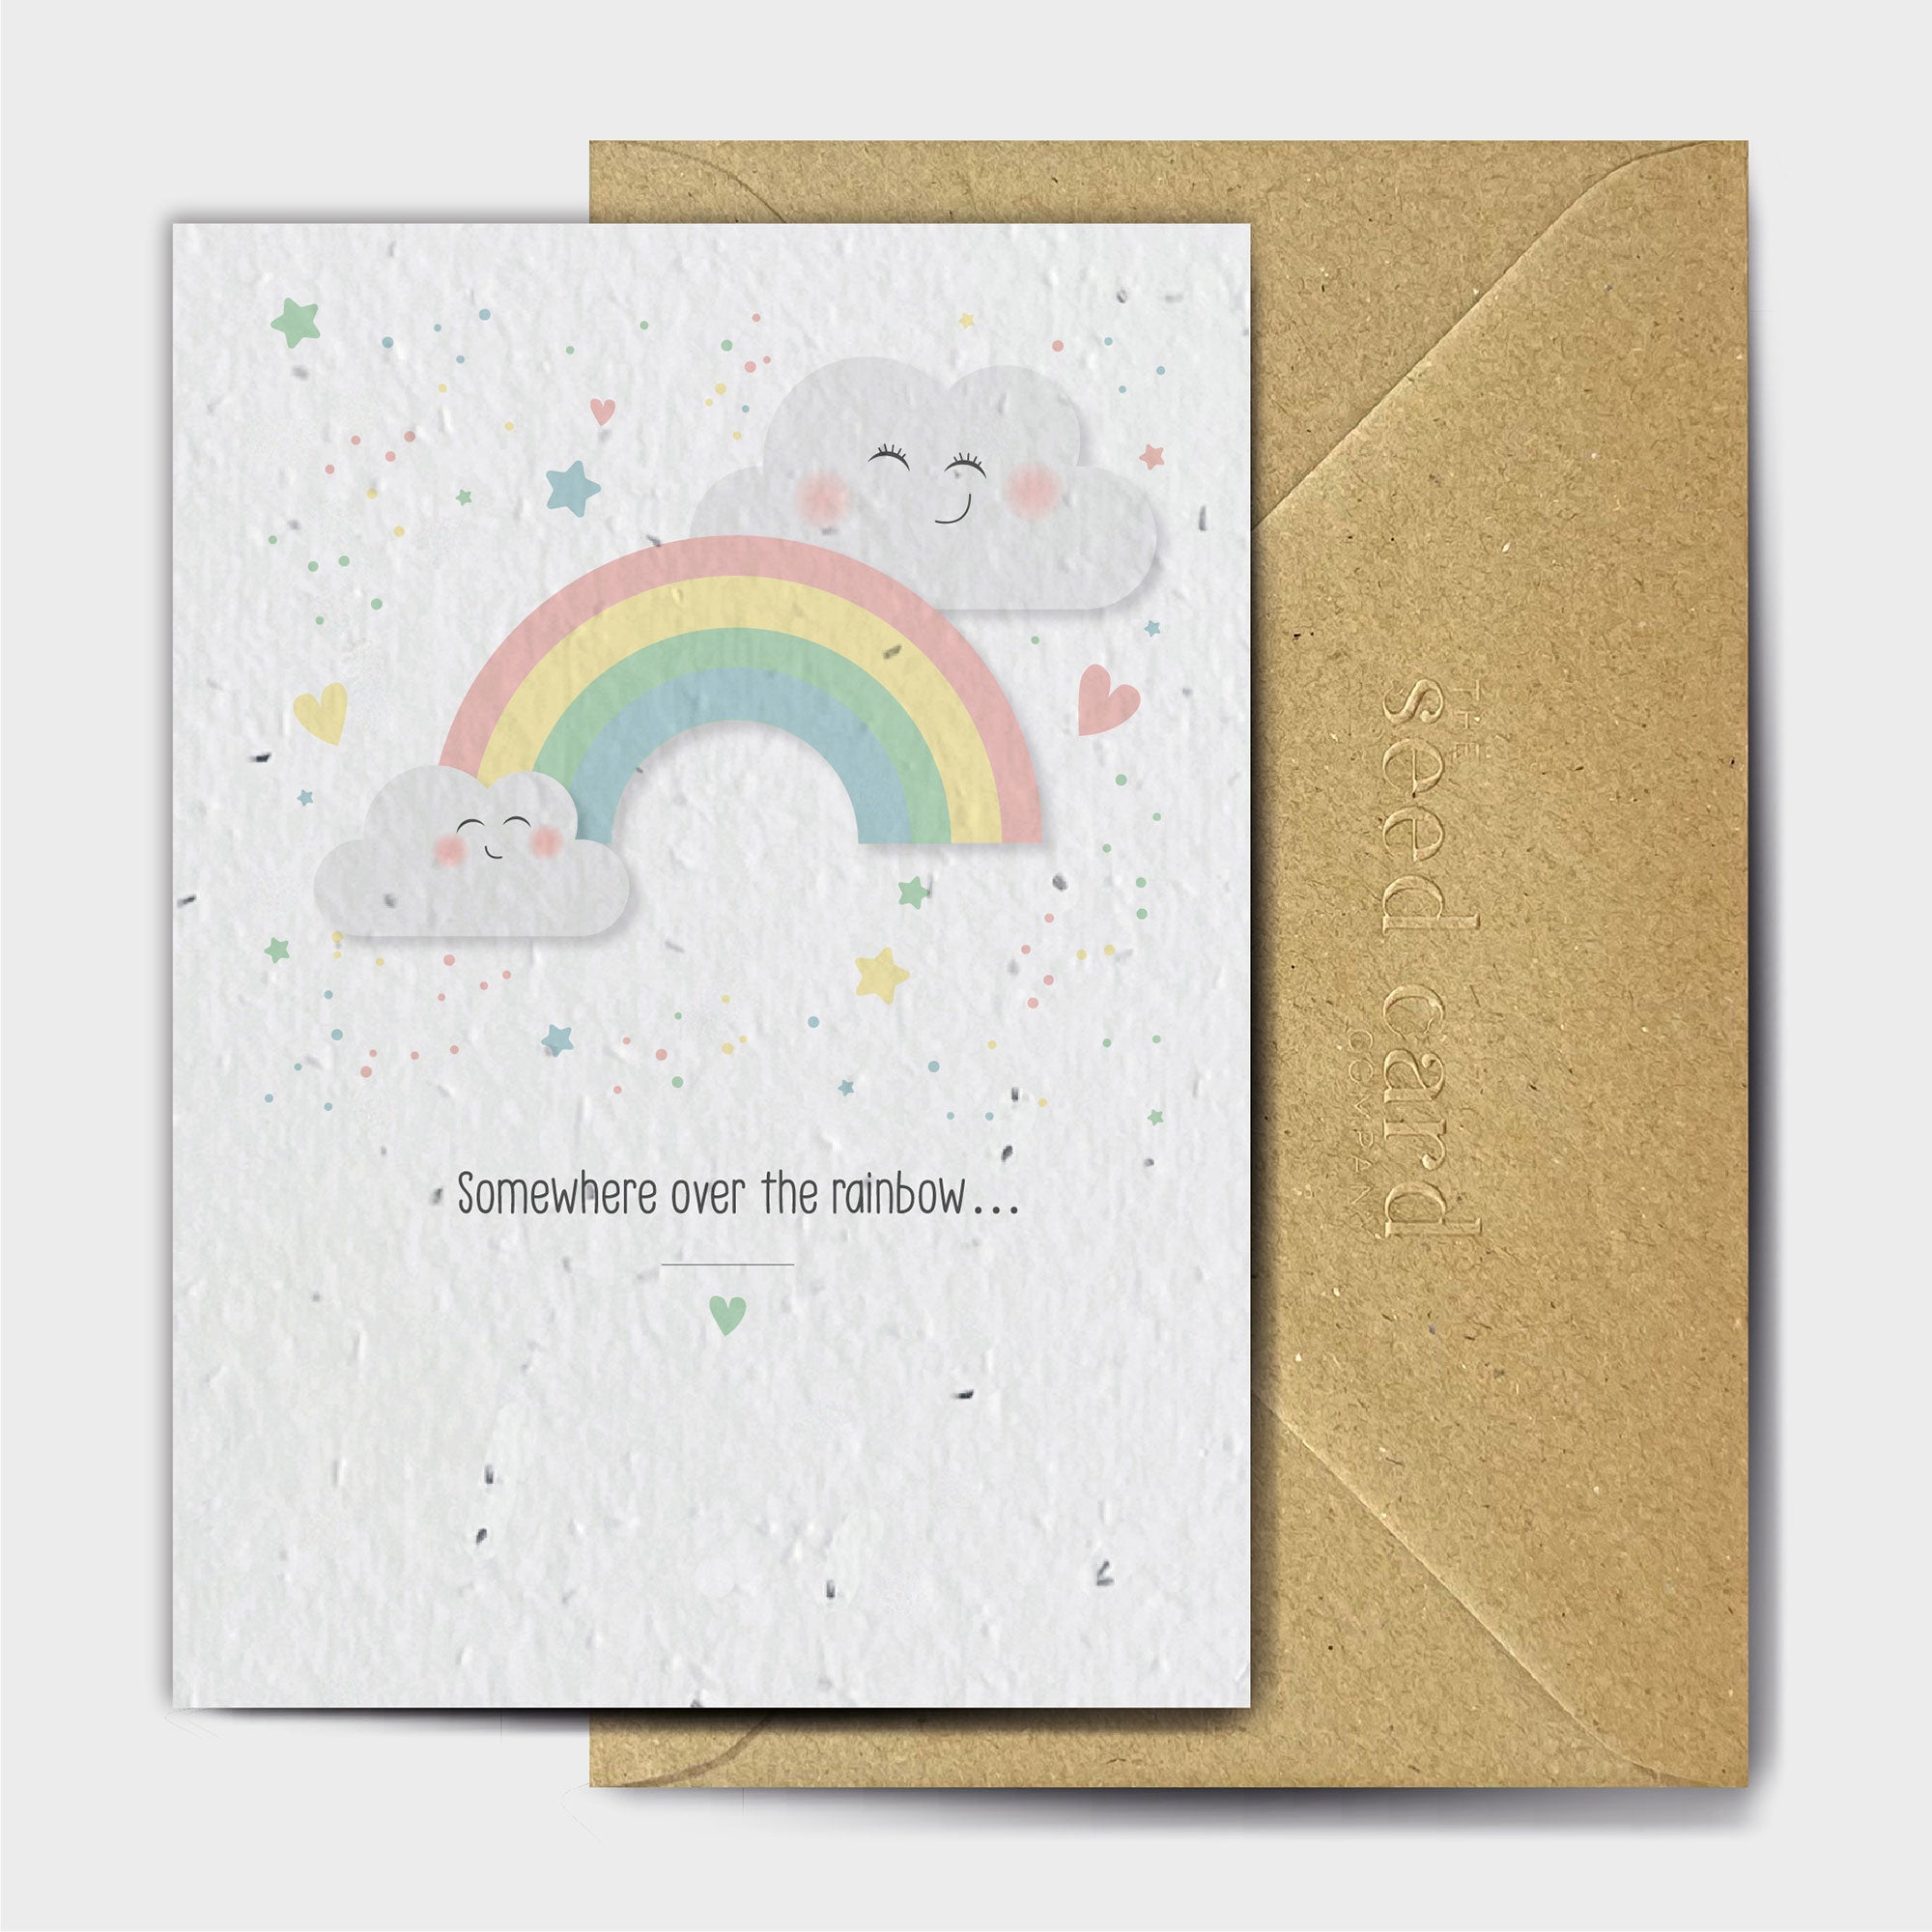 Shop online Somewhere Over The Rainbow - 100% biodegradable seed-embedded cards Shop -The Seed Card Company